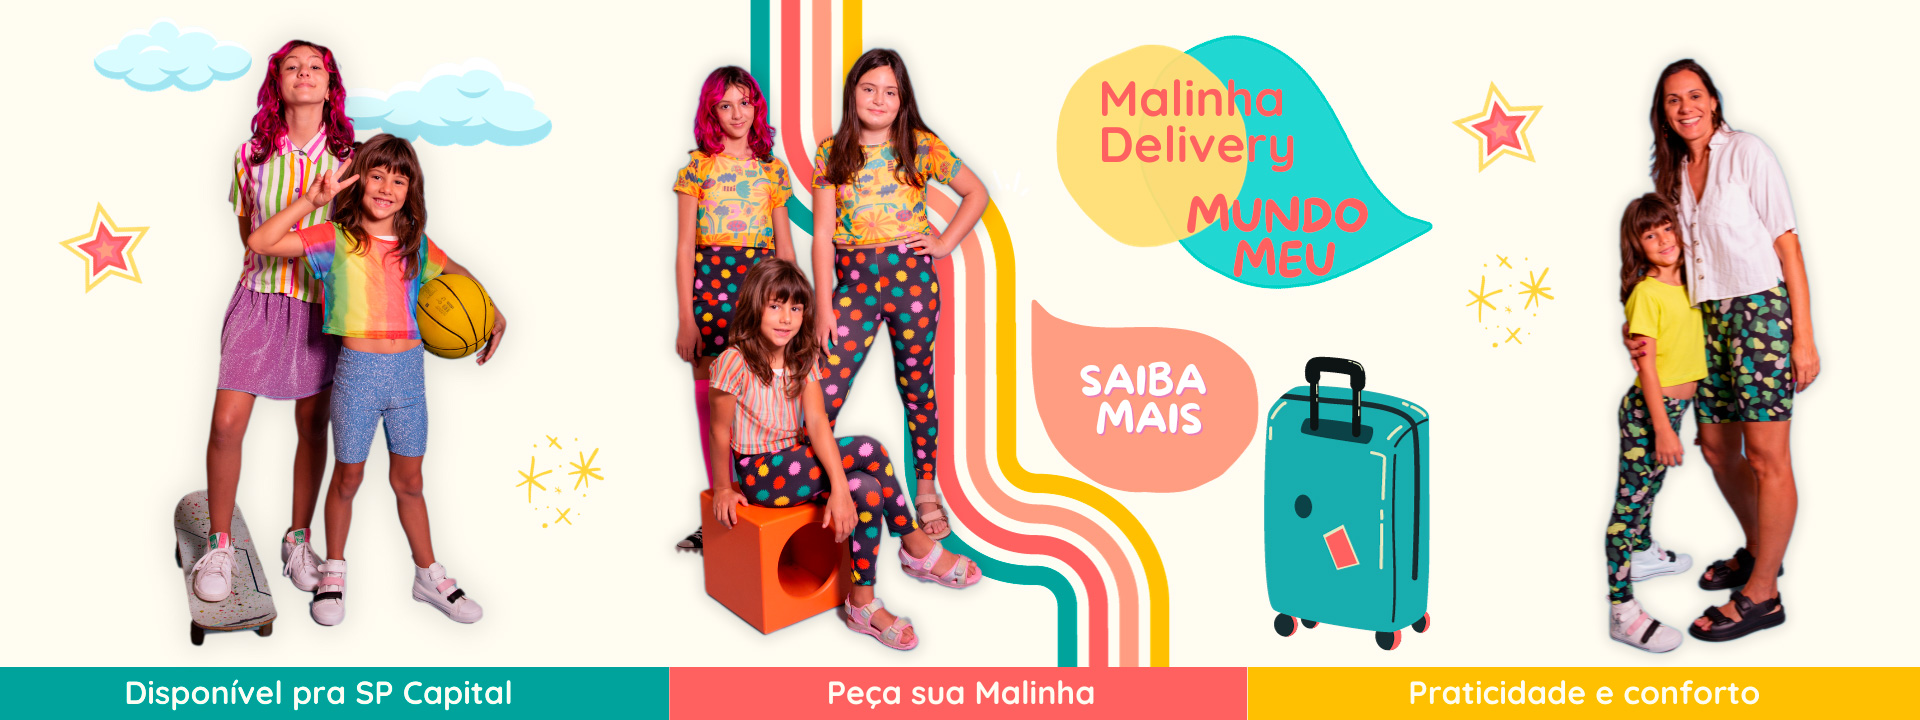 Malinha delivery